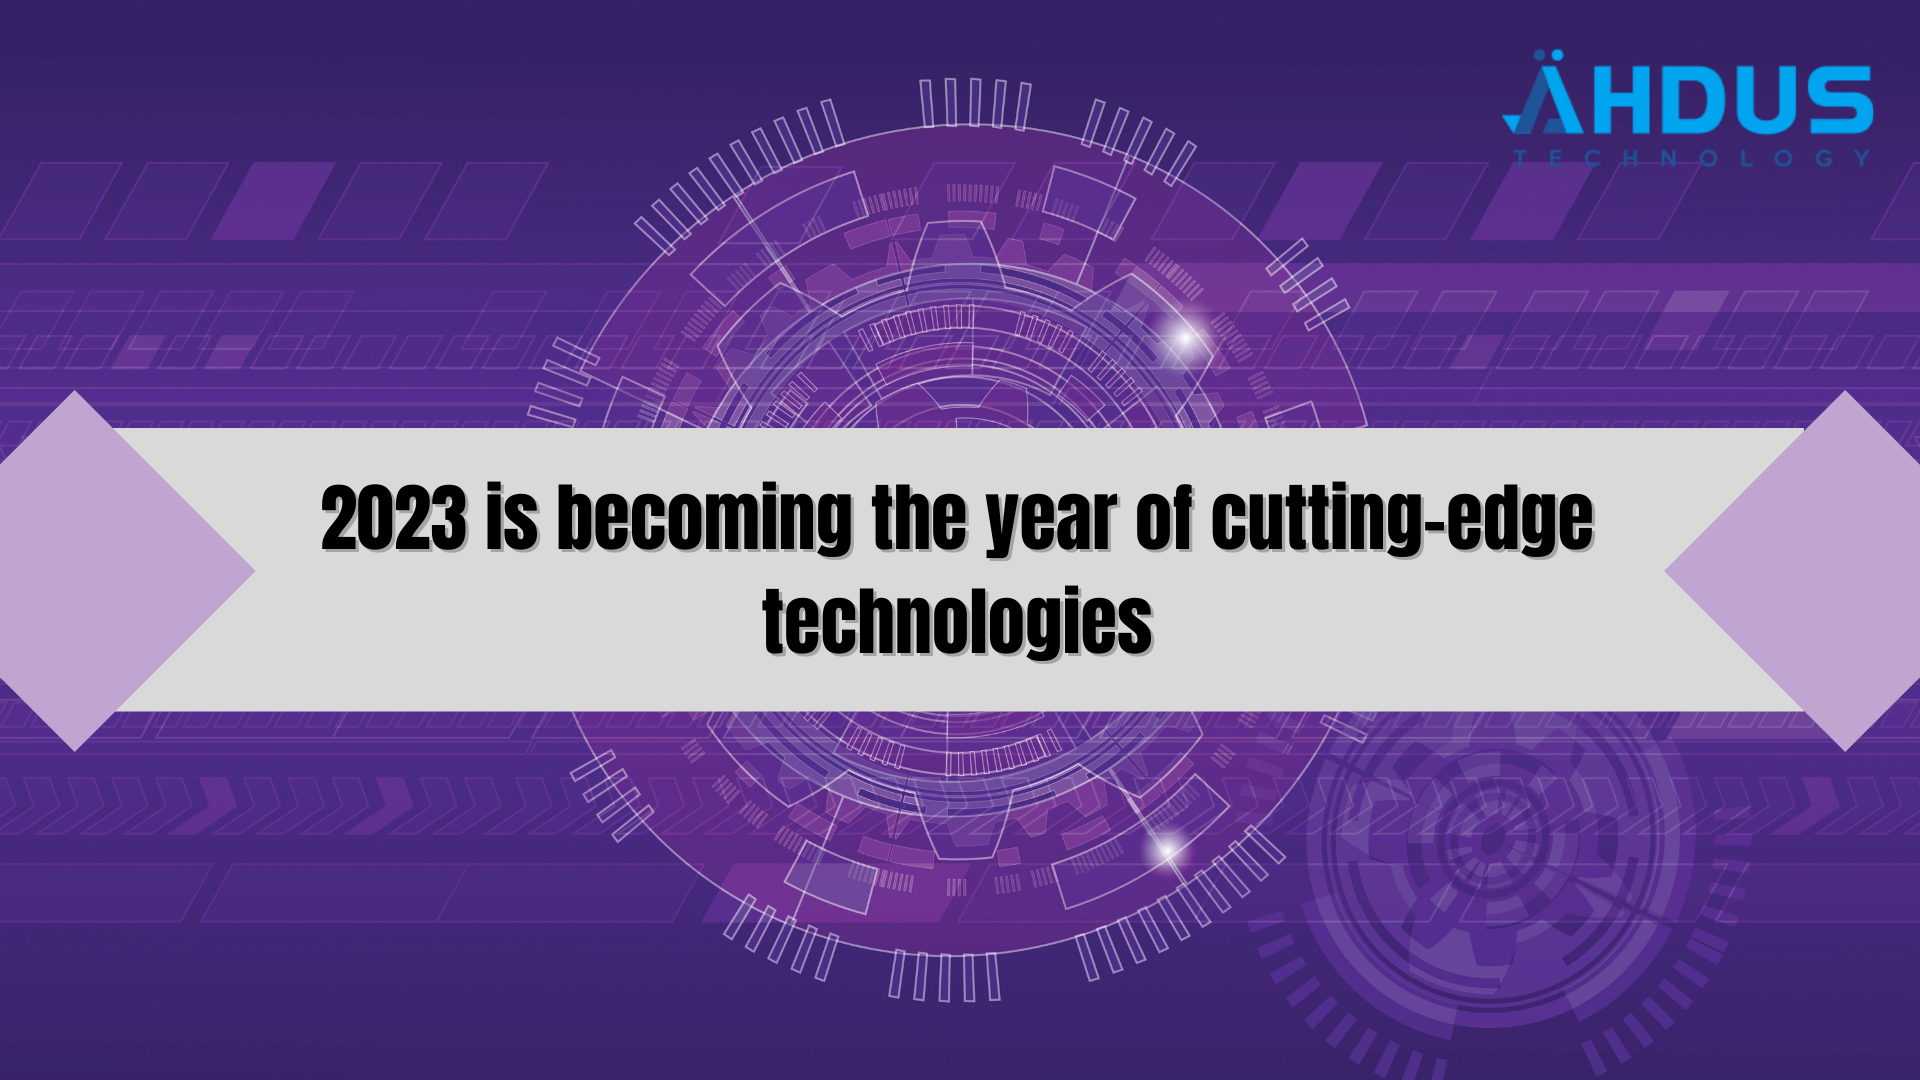 2023 is becoming the year of cutting-edge technologies